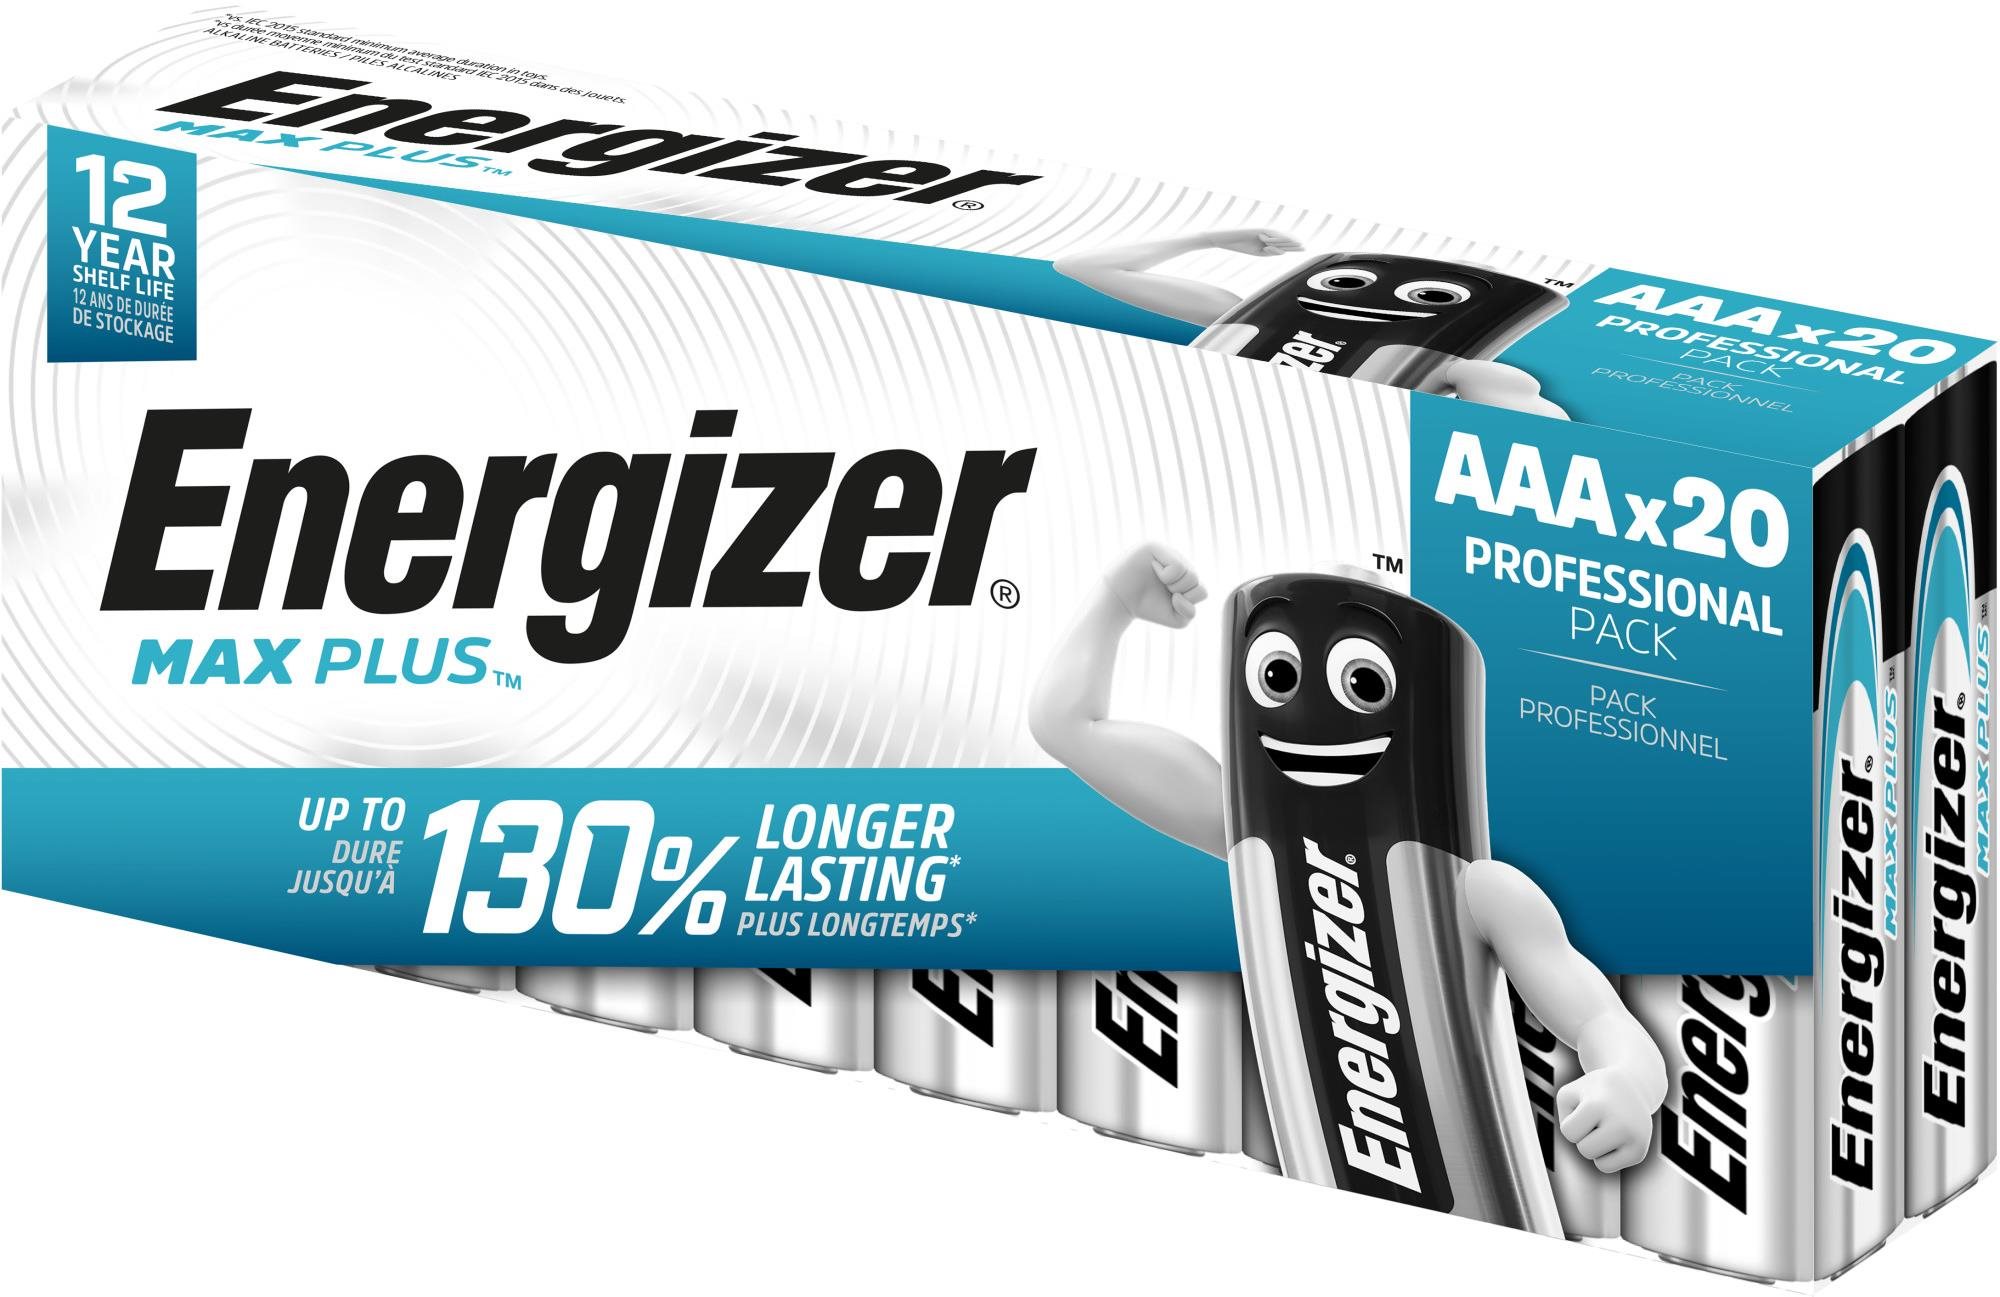 Energizer MAX Plus Professional AAA 20pack